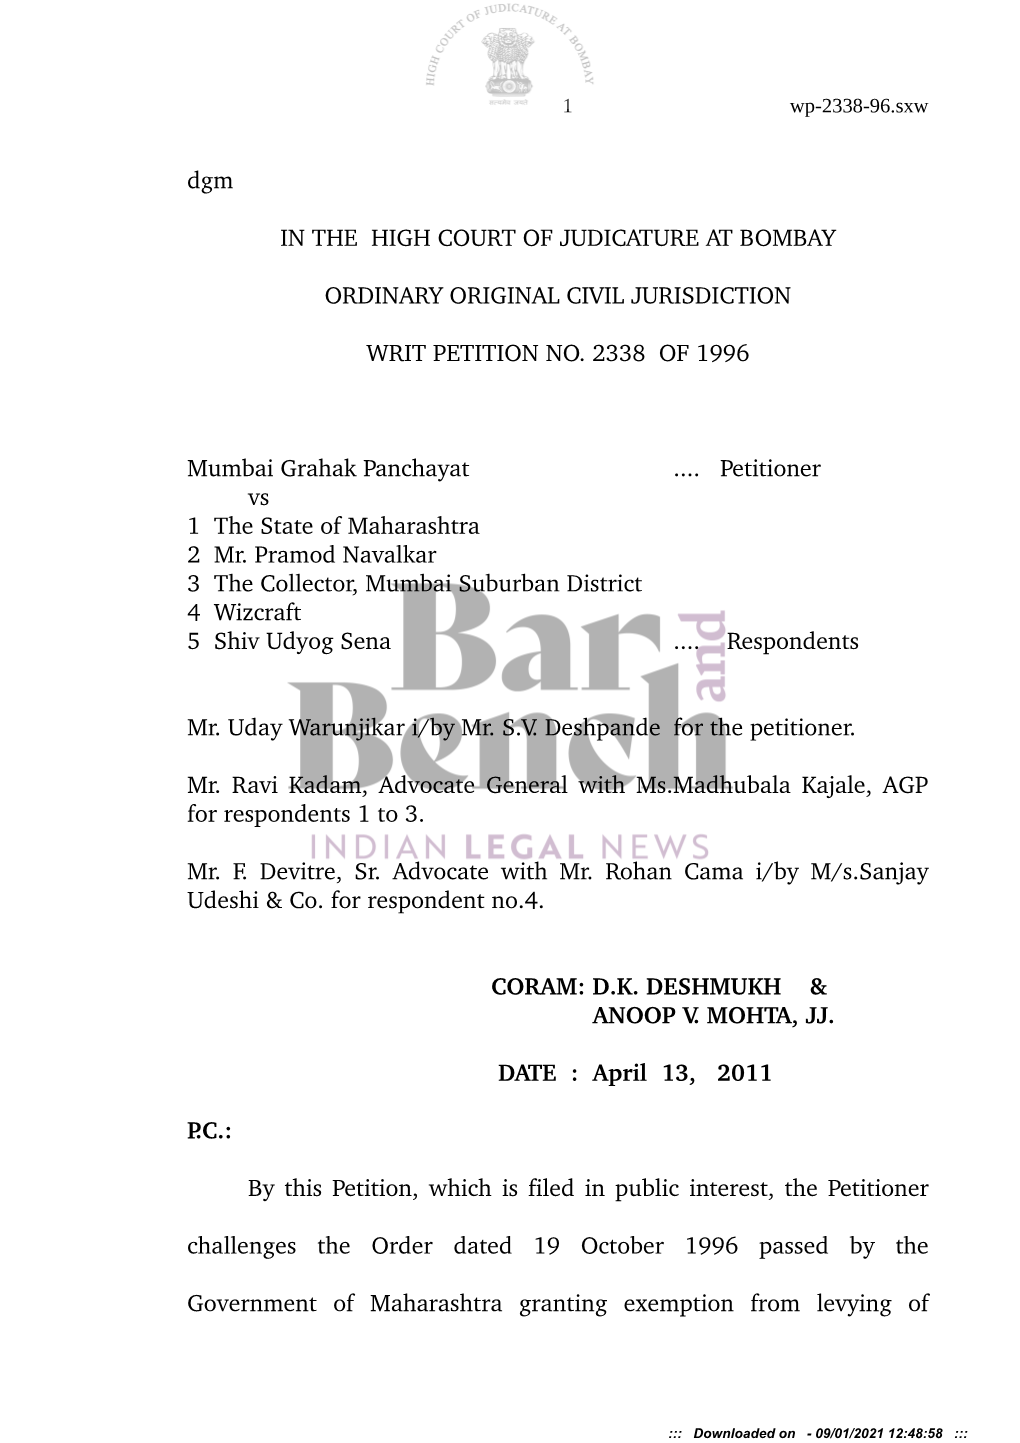 Dgm in the HIGH COURT of JUDICATURE at BOMBAY